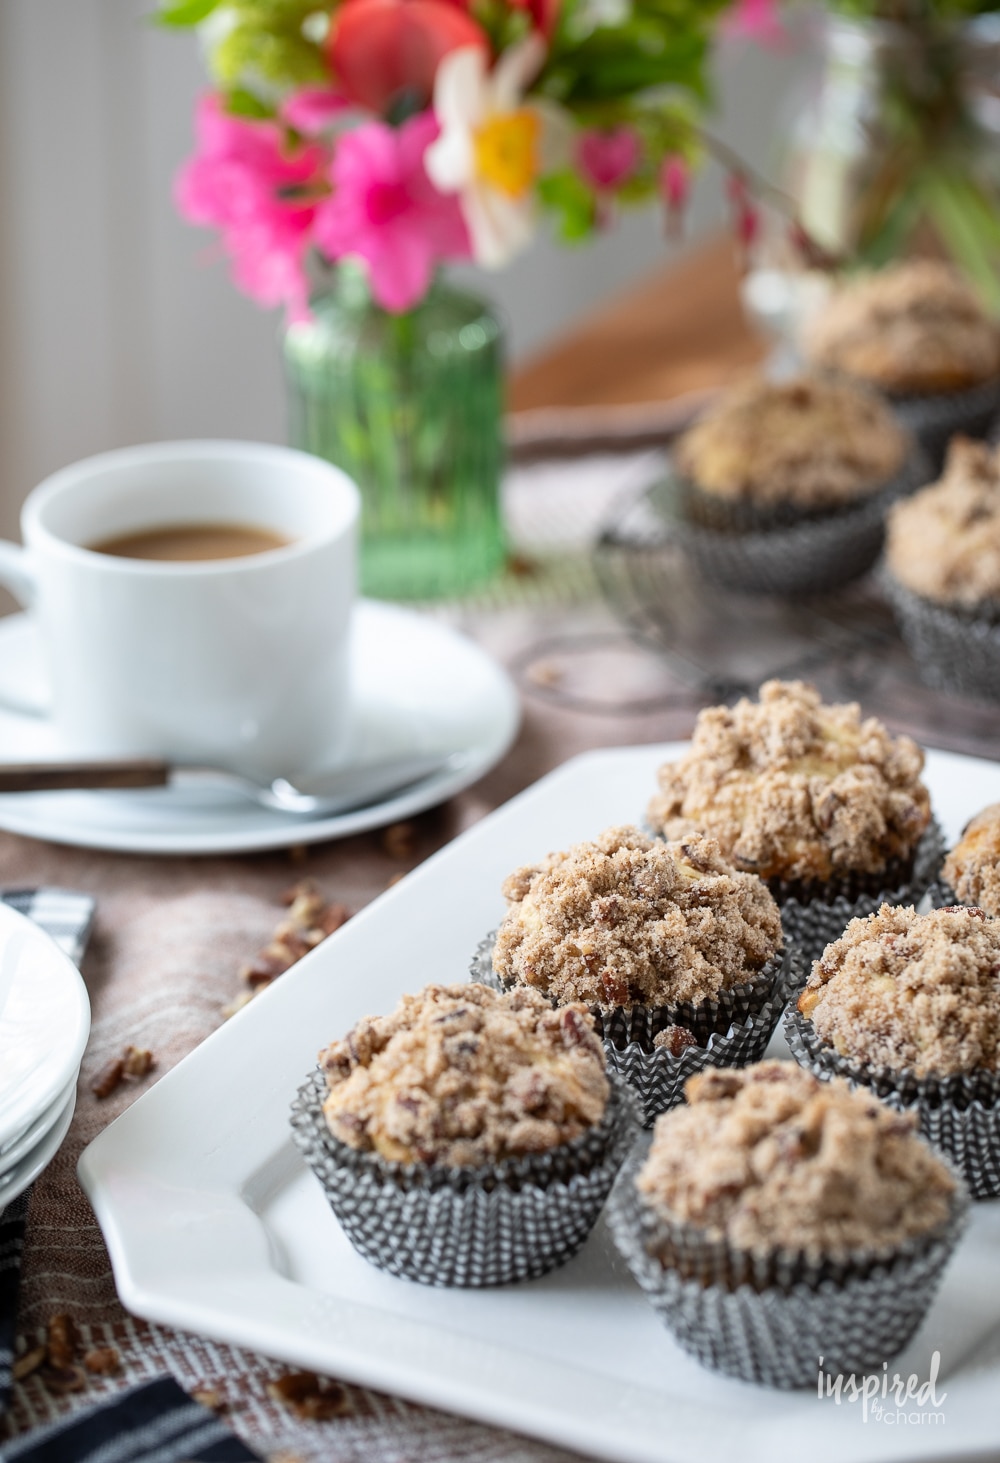 cinnamon maple morning muffin served with a cup of coffee and flowers in the background.